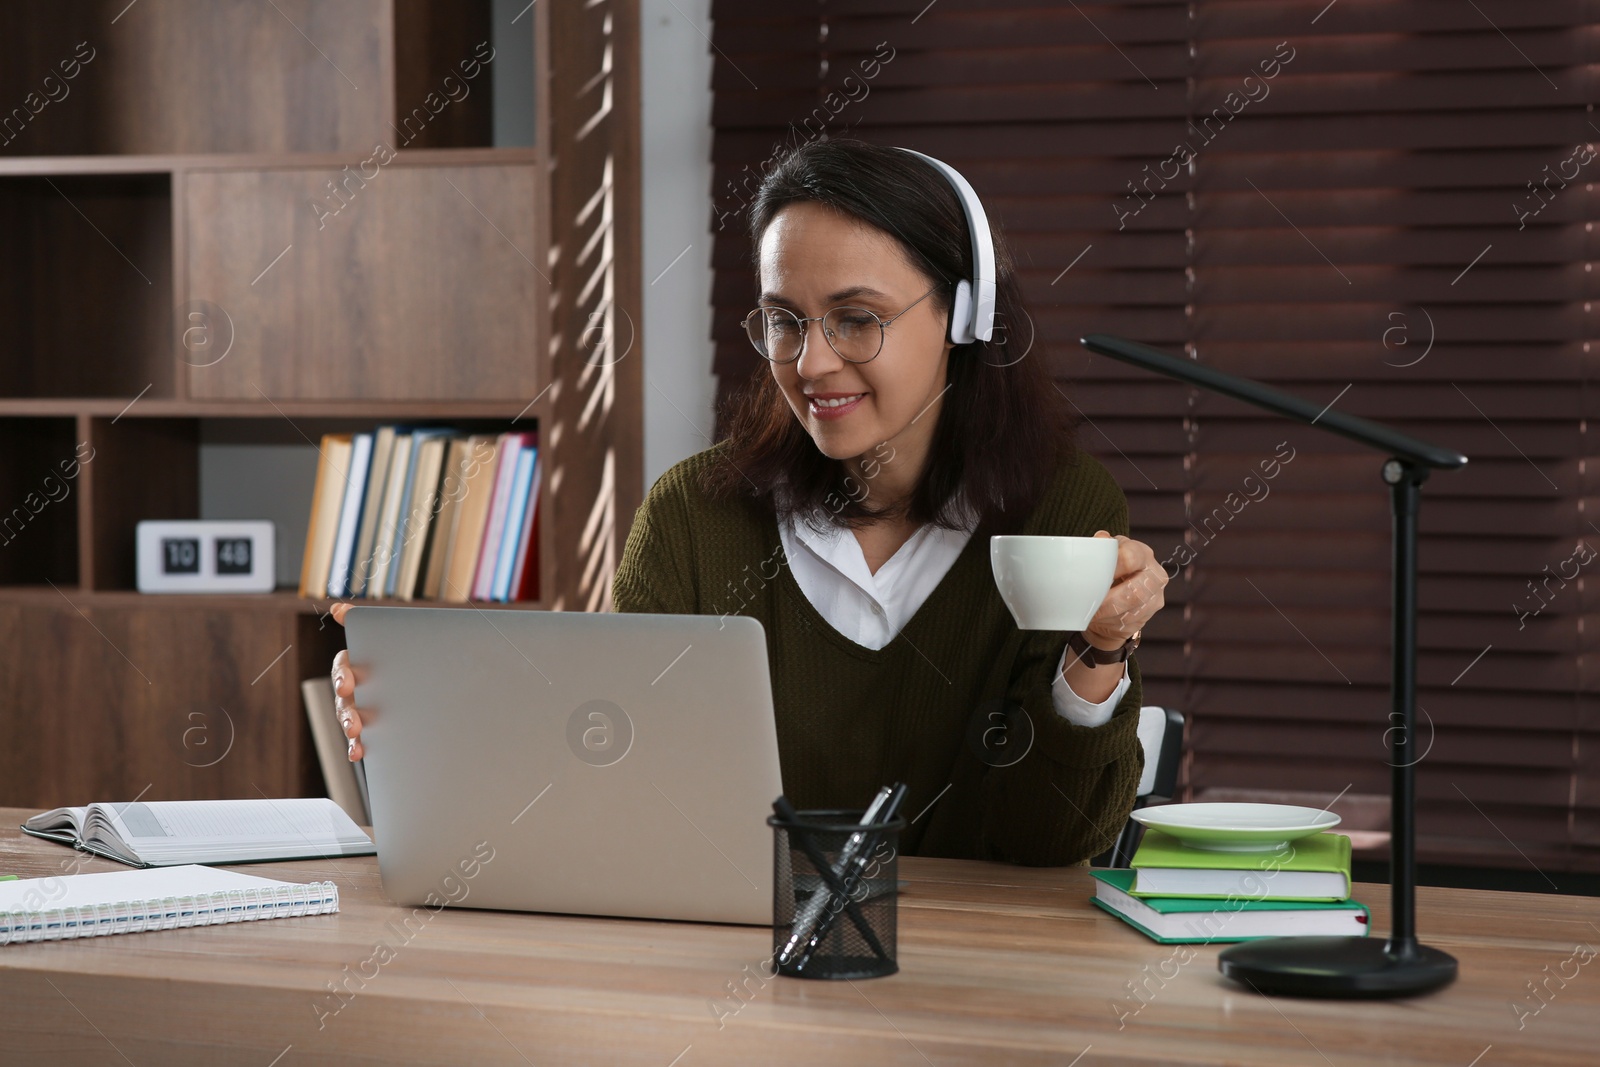 Photo of Woman with modern laptop and headphones drinking tea while learning at table indoors